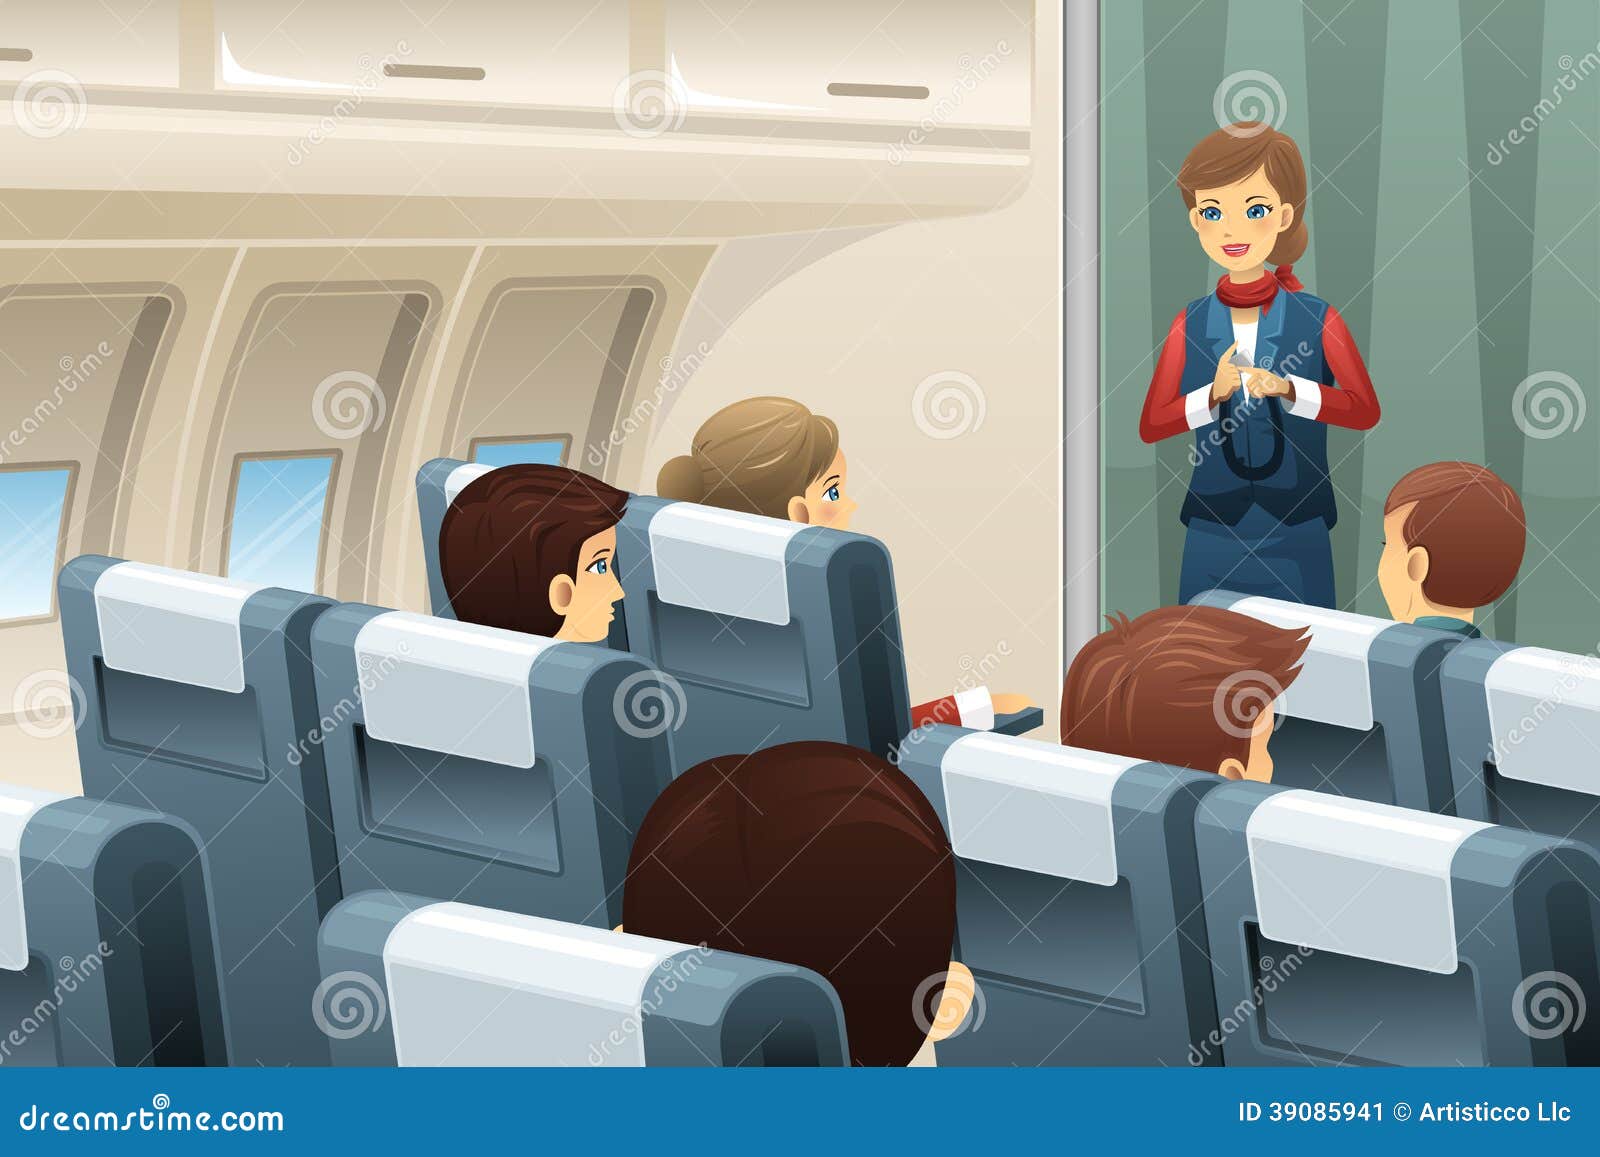 airplane seat clipart - photo #18